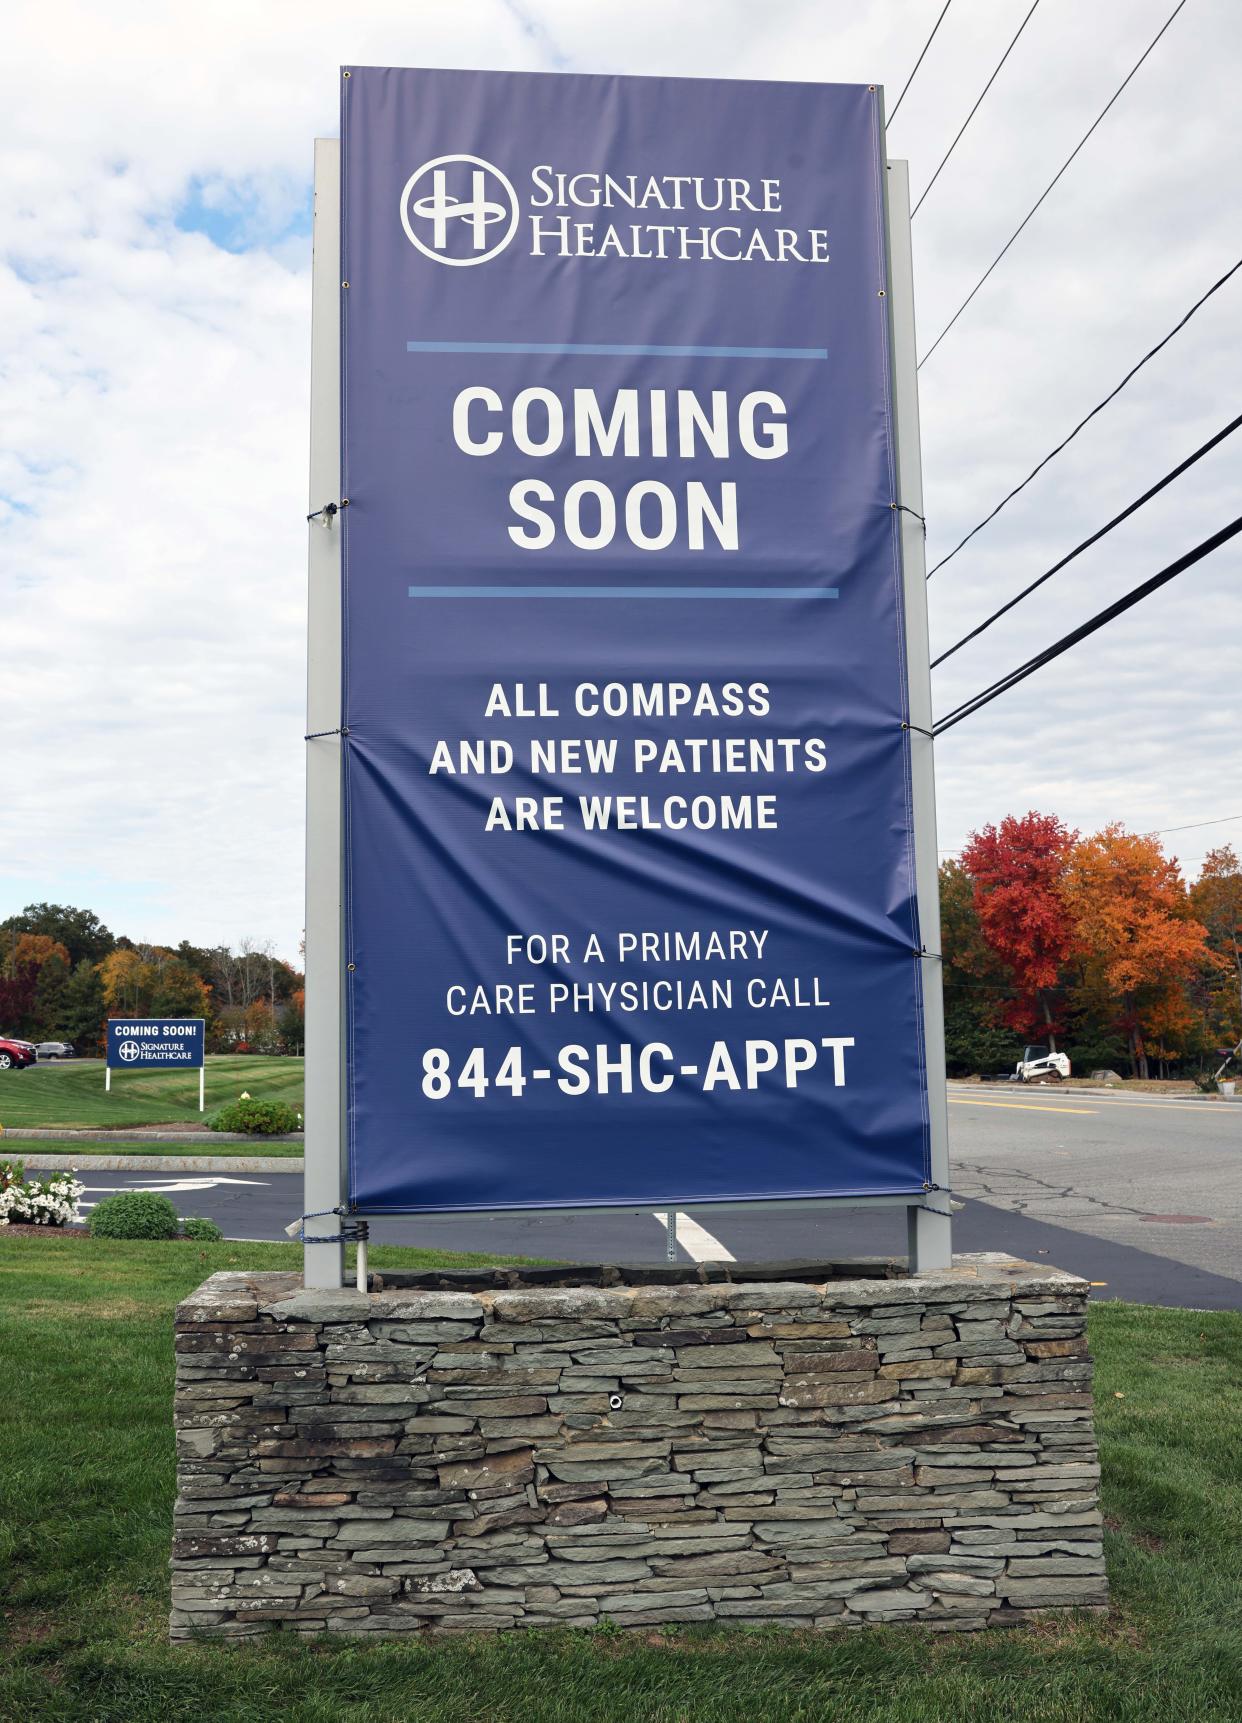 Signature Healthcare, One Compass Way, East Bridgewater, on Tuesday, October 24,2023.